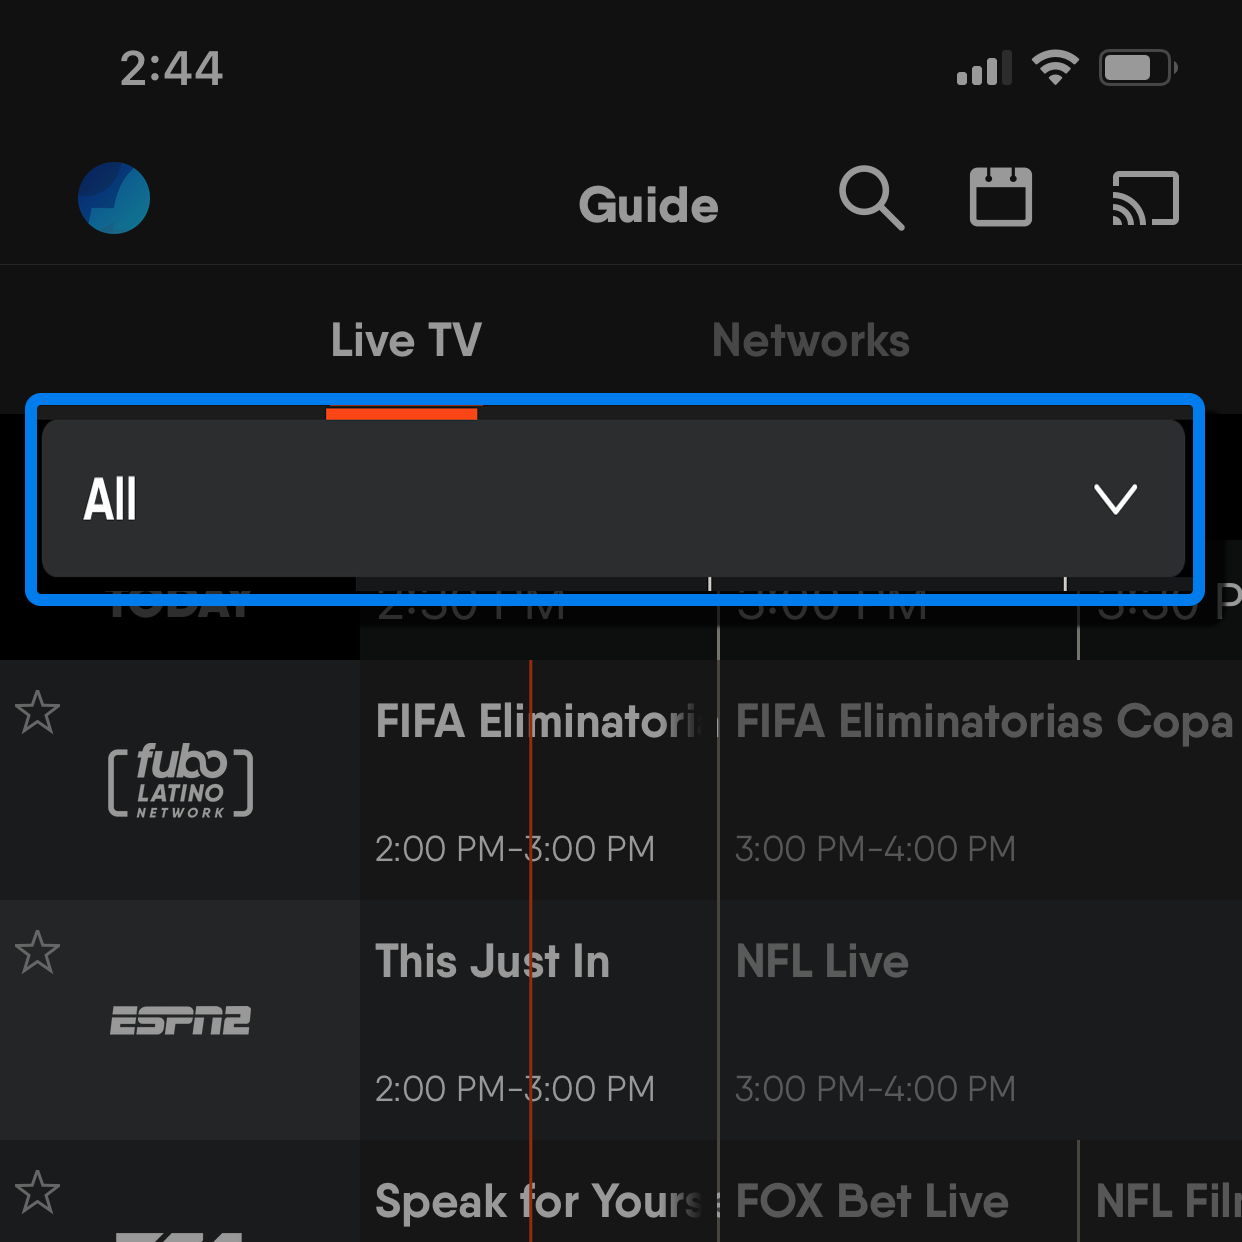 GUIDE screen of the FuboTV app on a mobile device with genre filter selection drop-down highlighted